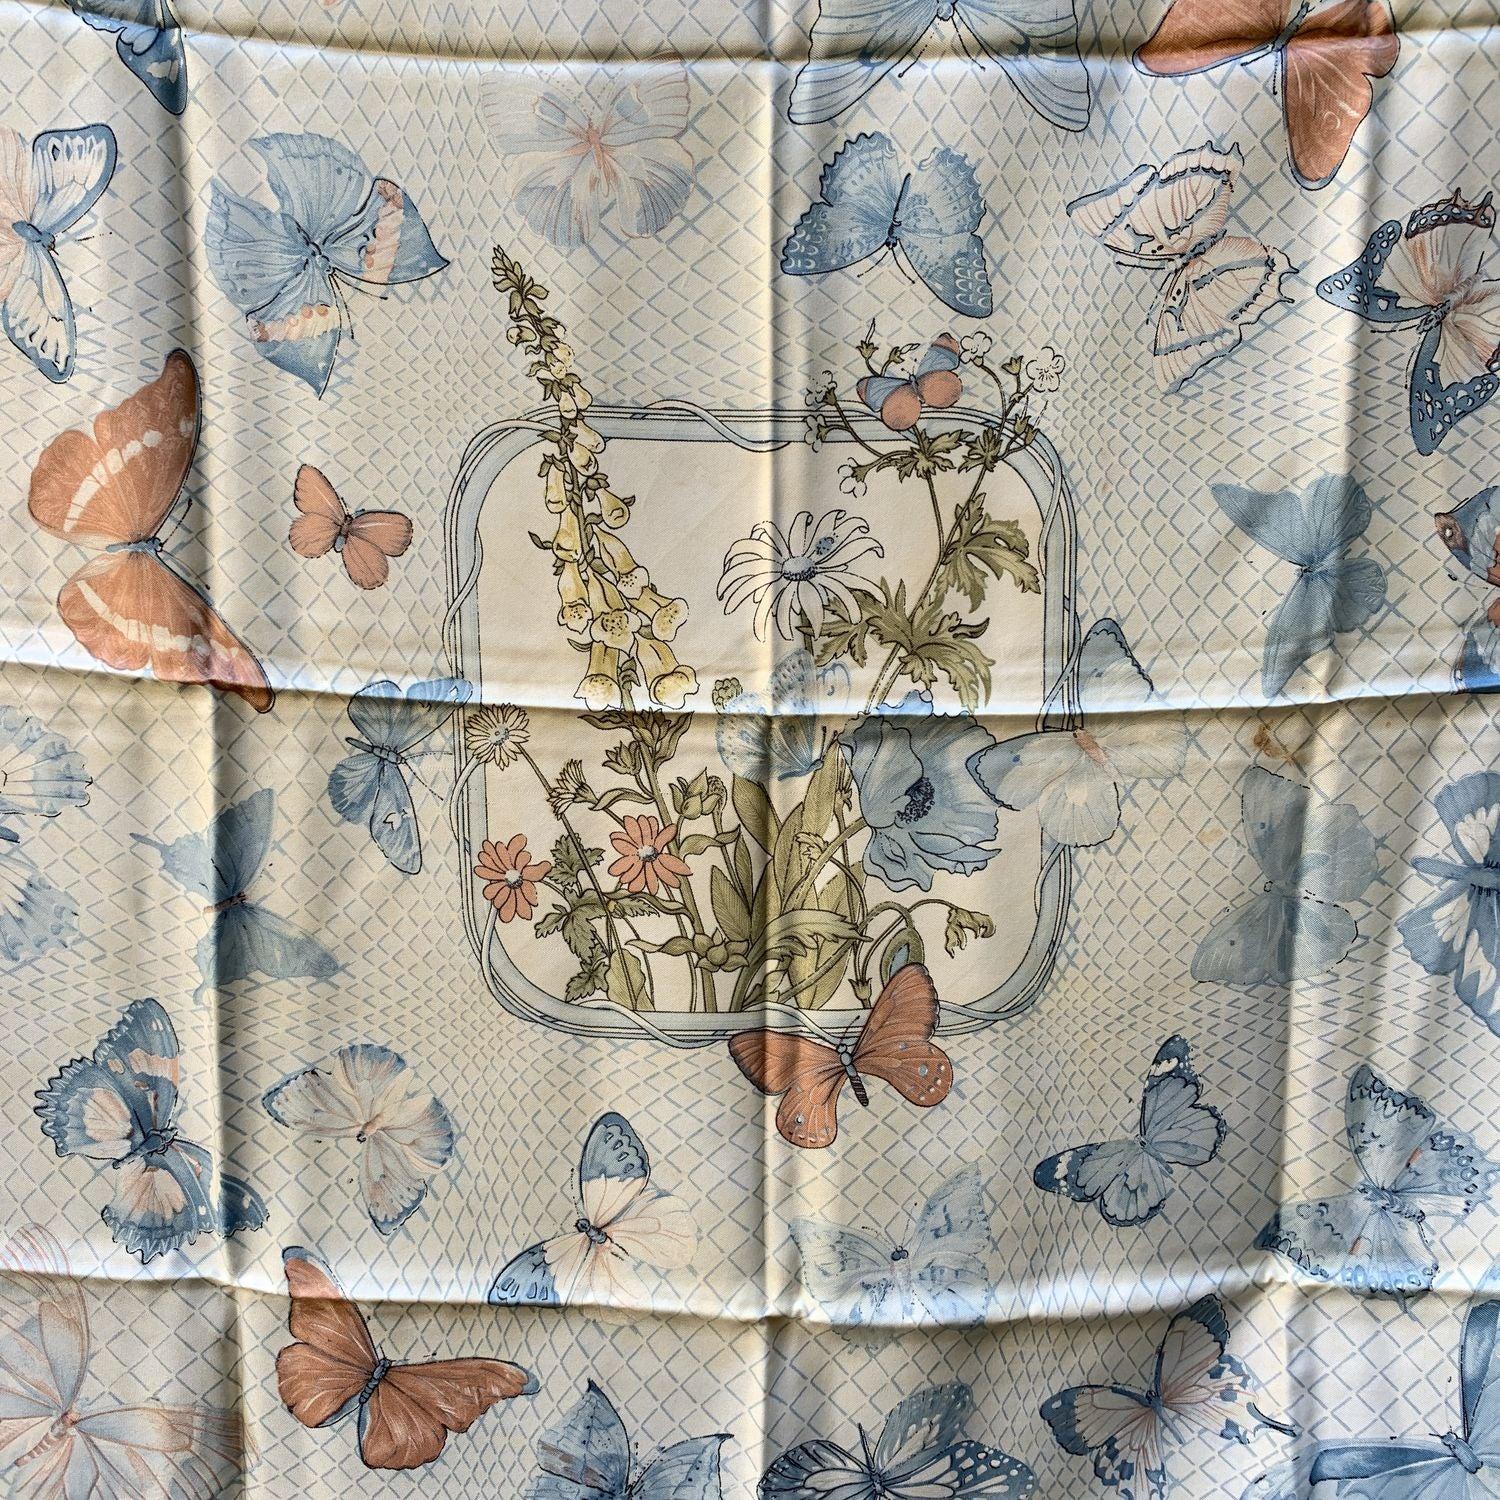 HERMES Silk scarf named 'Farandole', created by artist Caty Latham, and first issued in 1985. It was re-issued in 1990 and in 2006. Beautiful butterflies design. Light blue colorway. 100% Silk. Hand rolled edges. Approx measurements: 35 x 35 inches